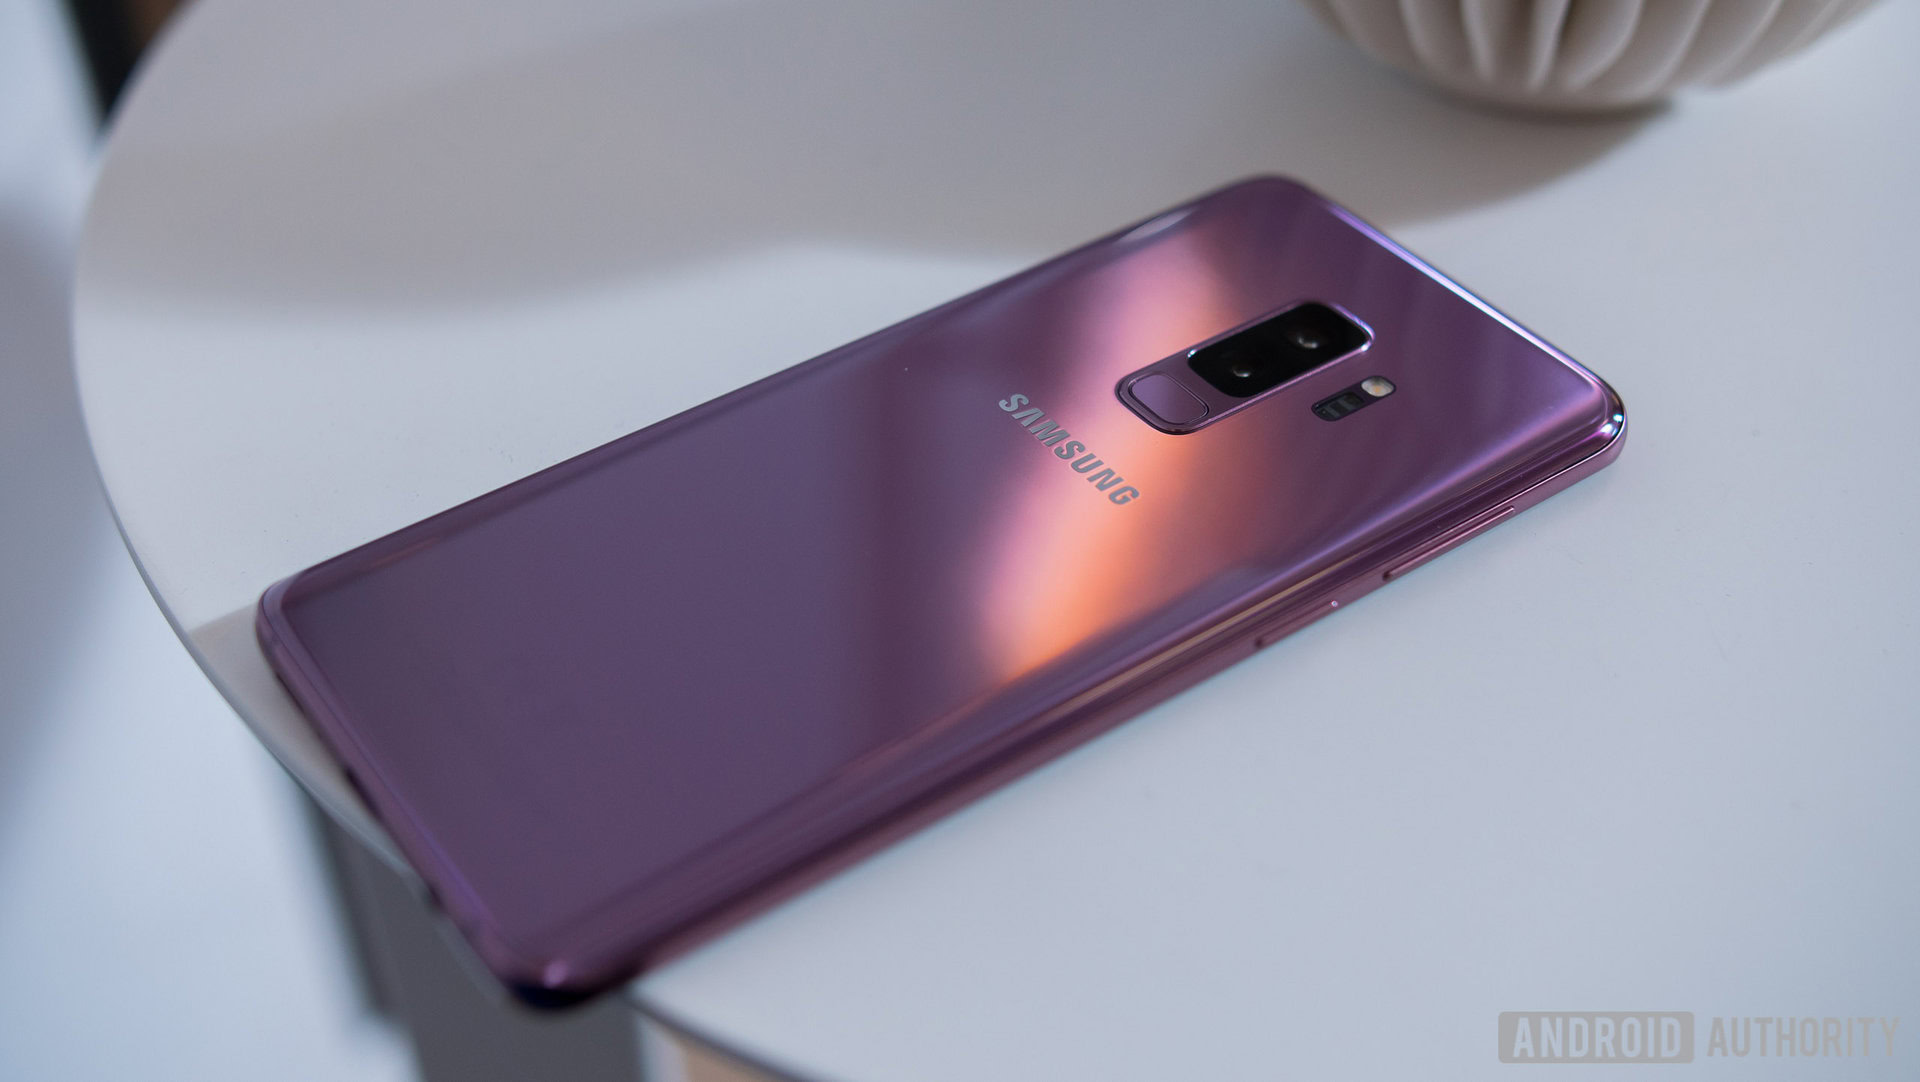 Which Galaxy S9 color should I buy: Black, purple, blue, gray or